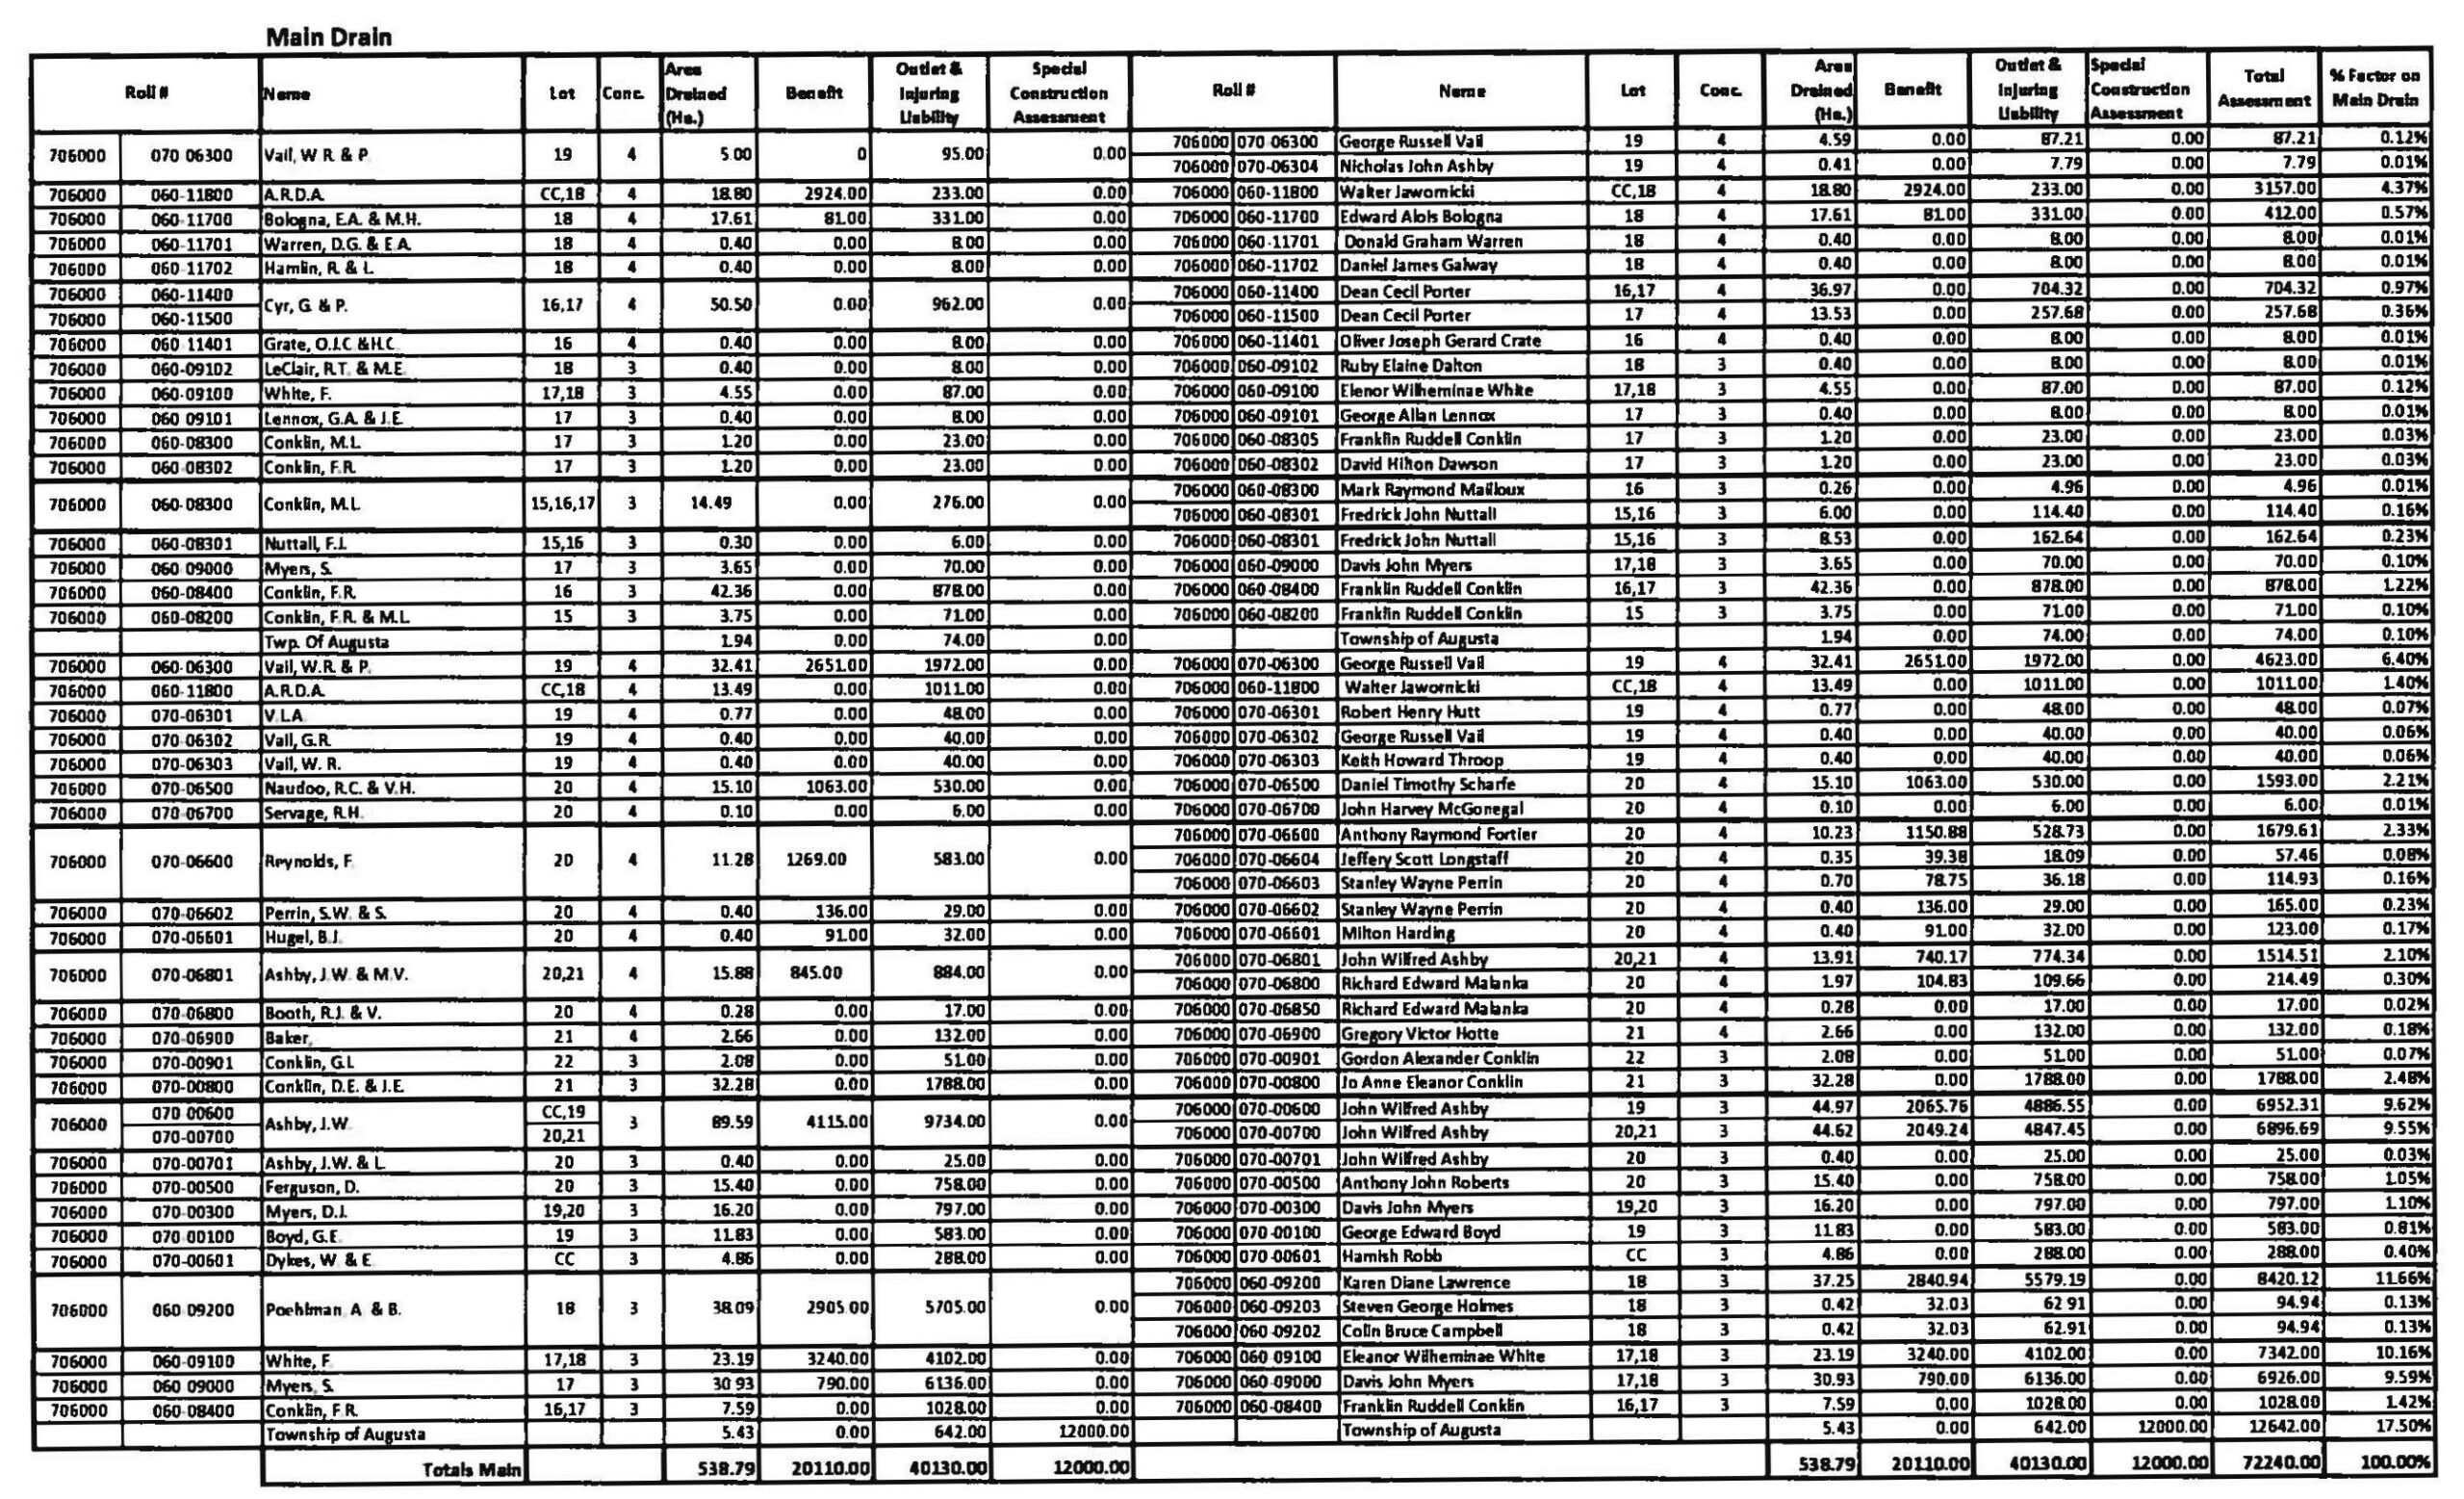 table showing the changes to the assessment schedule page 01